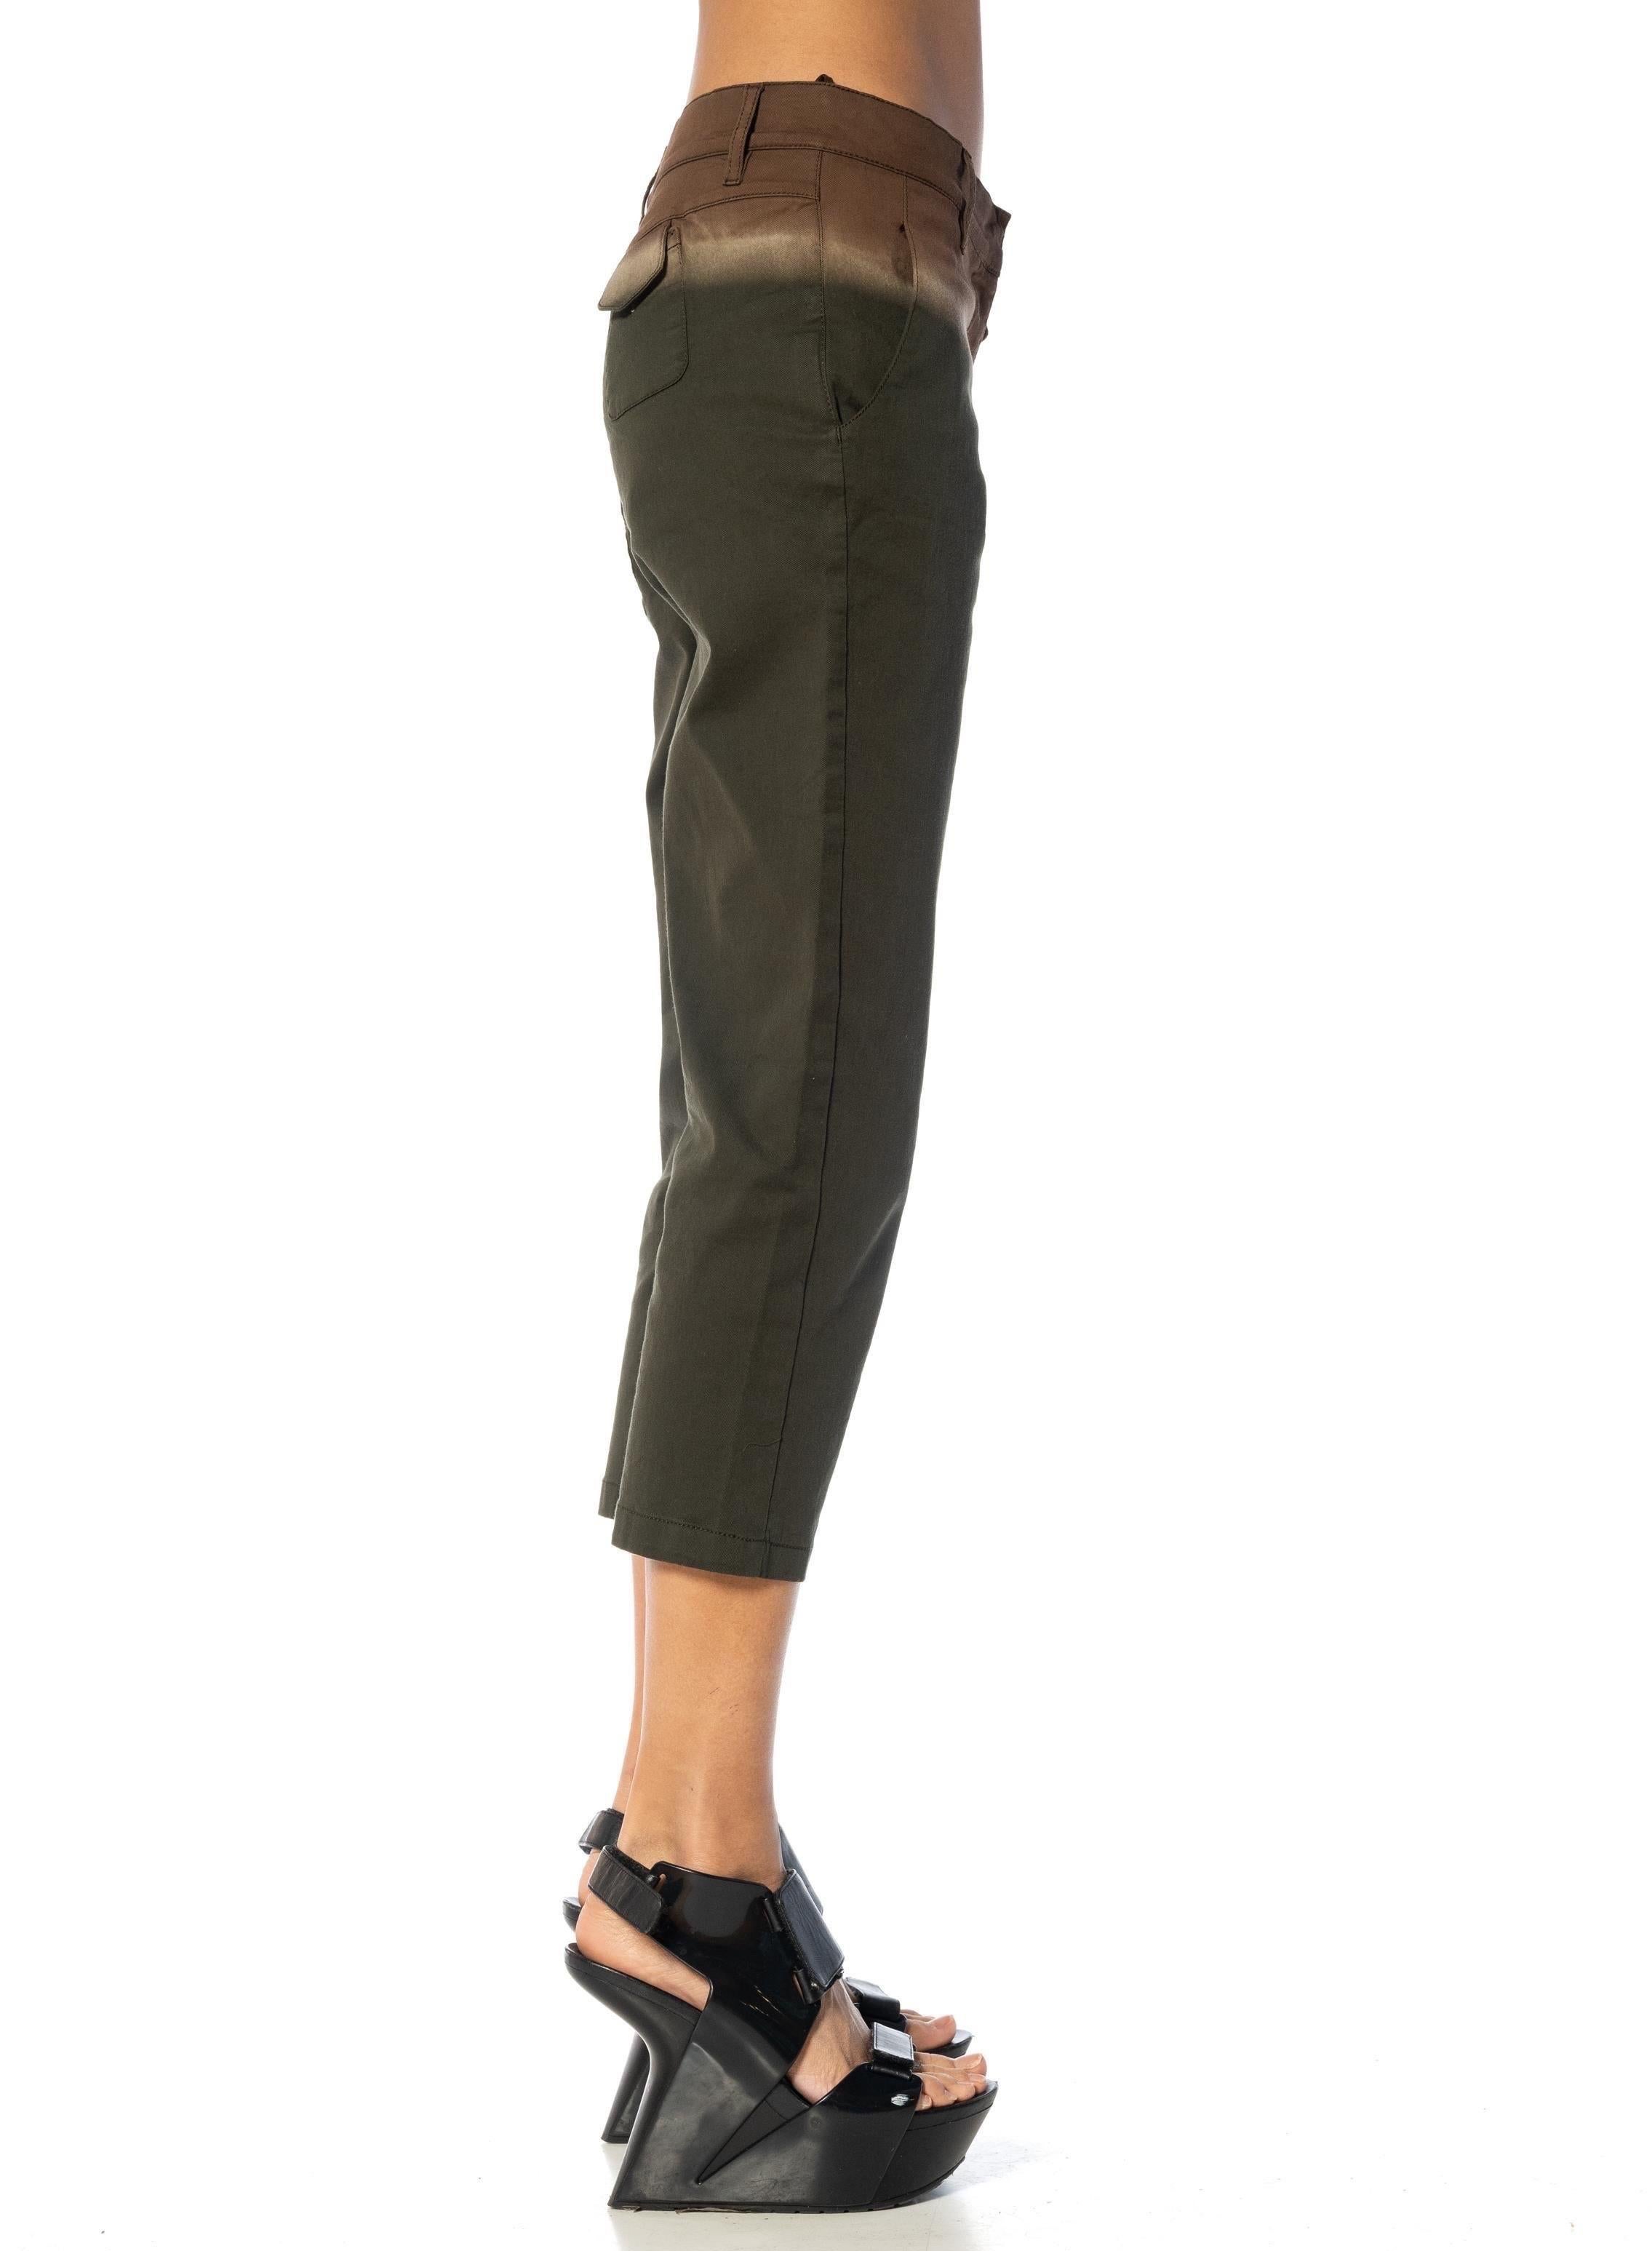 2000S PRADA Brown & Olive Green Cotton Pants For Sale 1